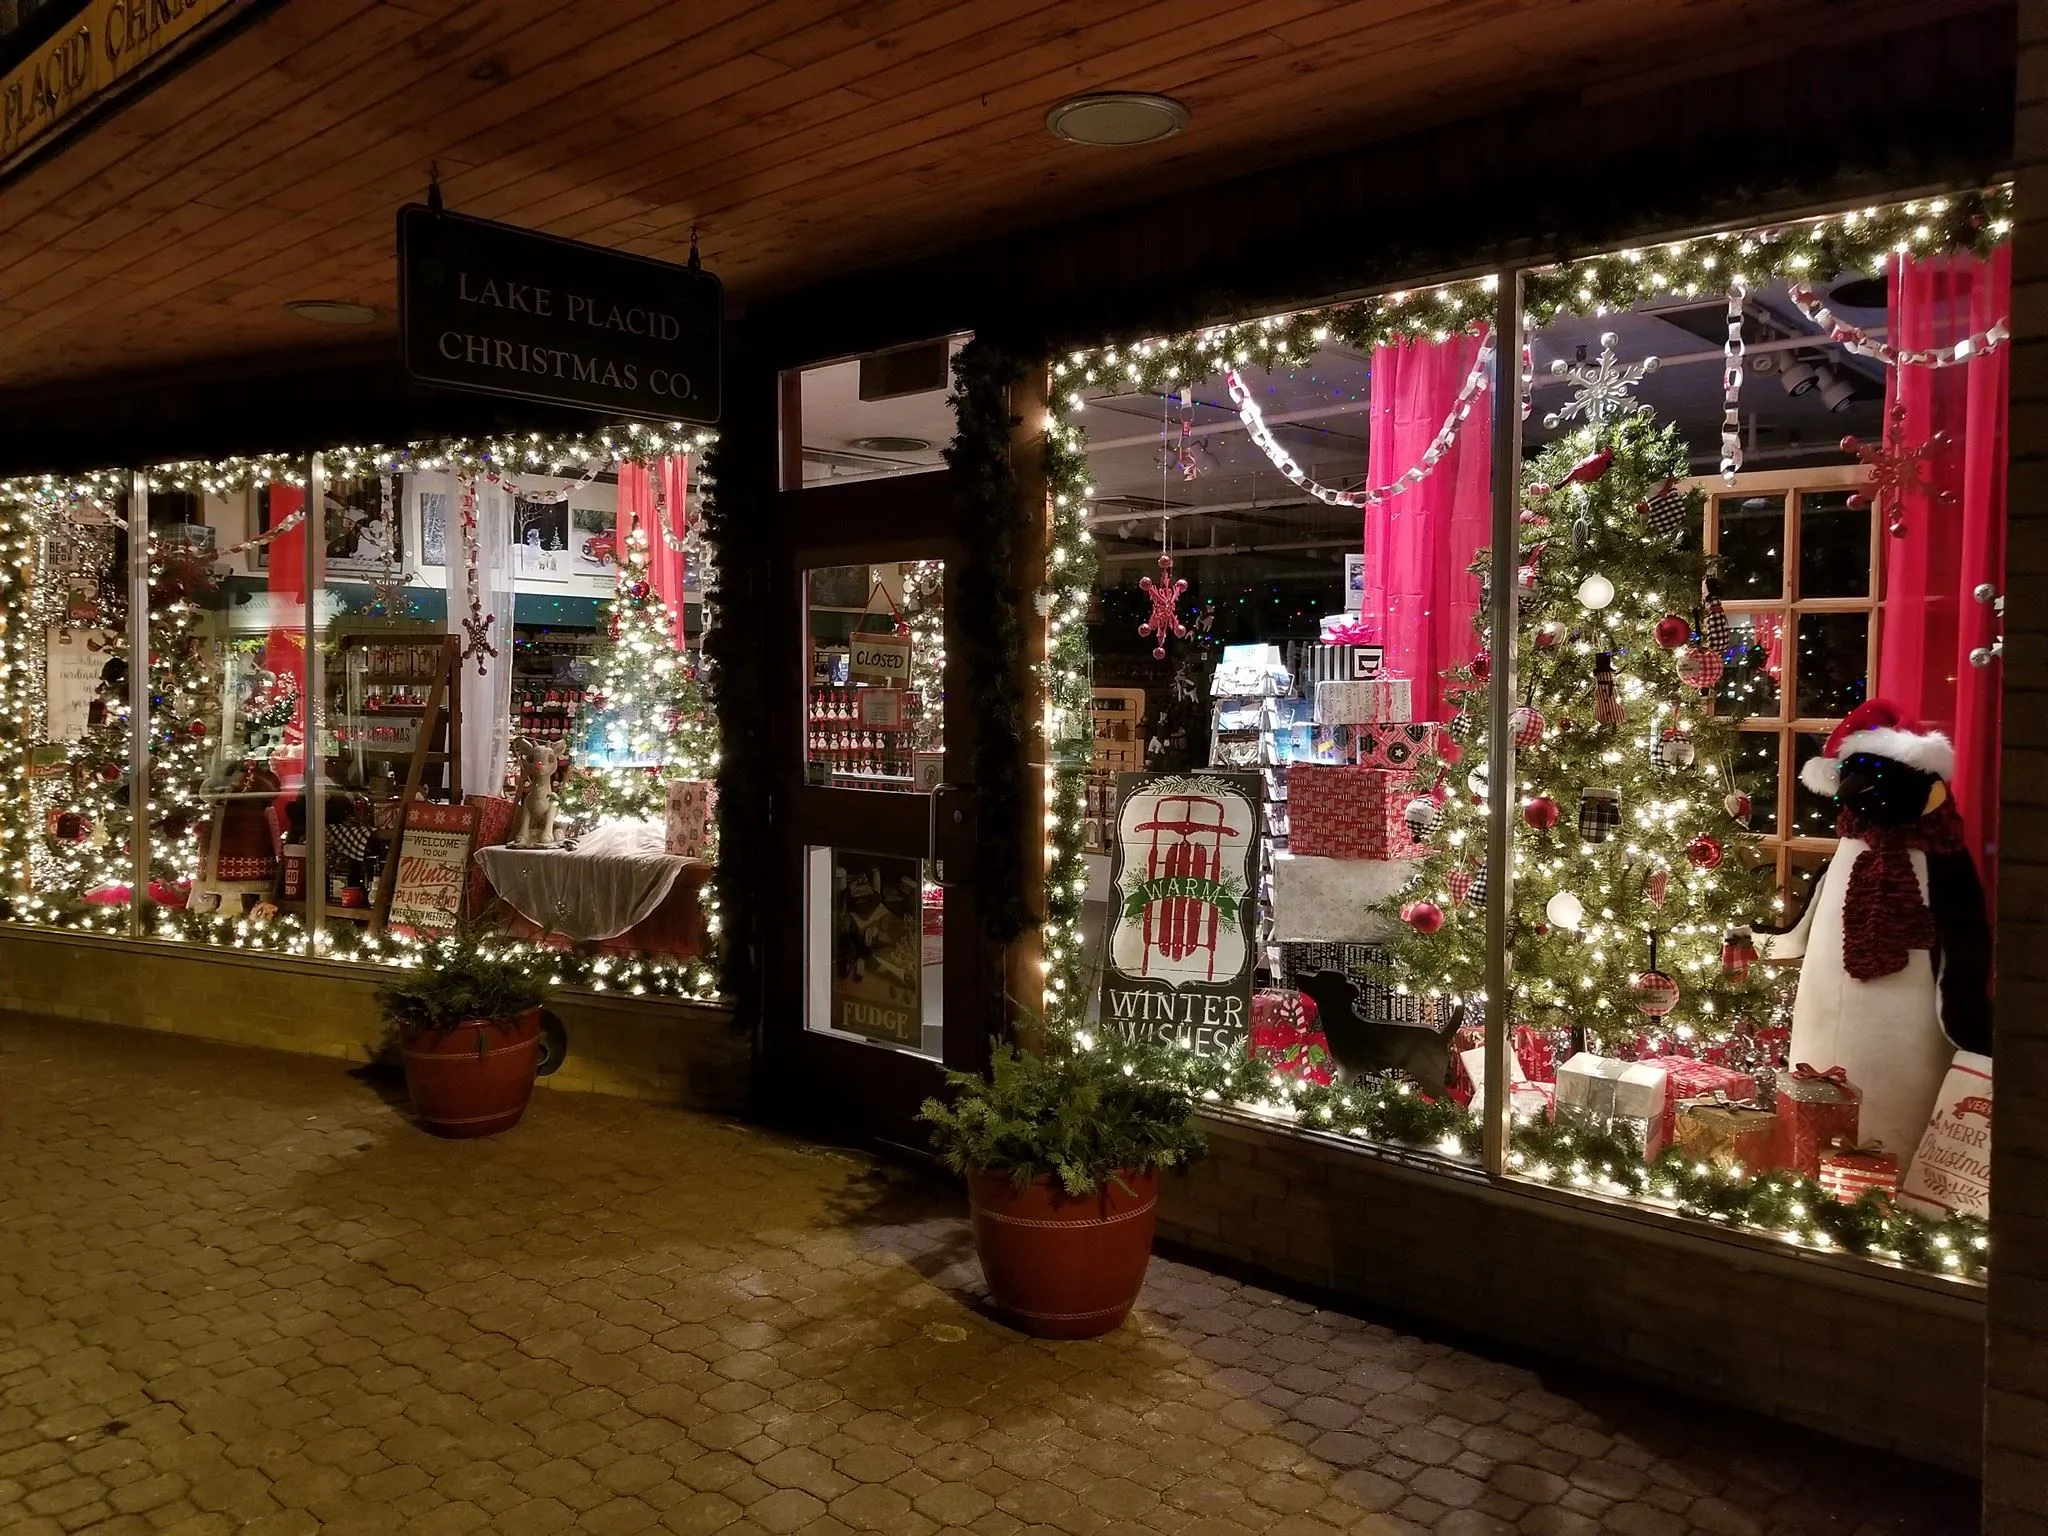 Lake Placid Christmas Co in USA, north_america | Souvenirs - Country Helper